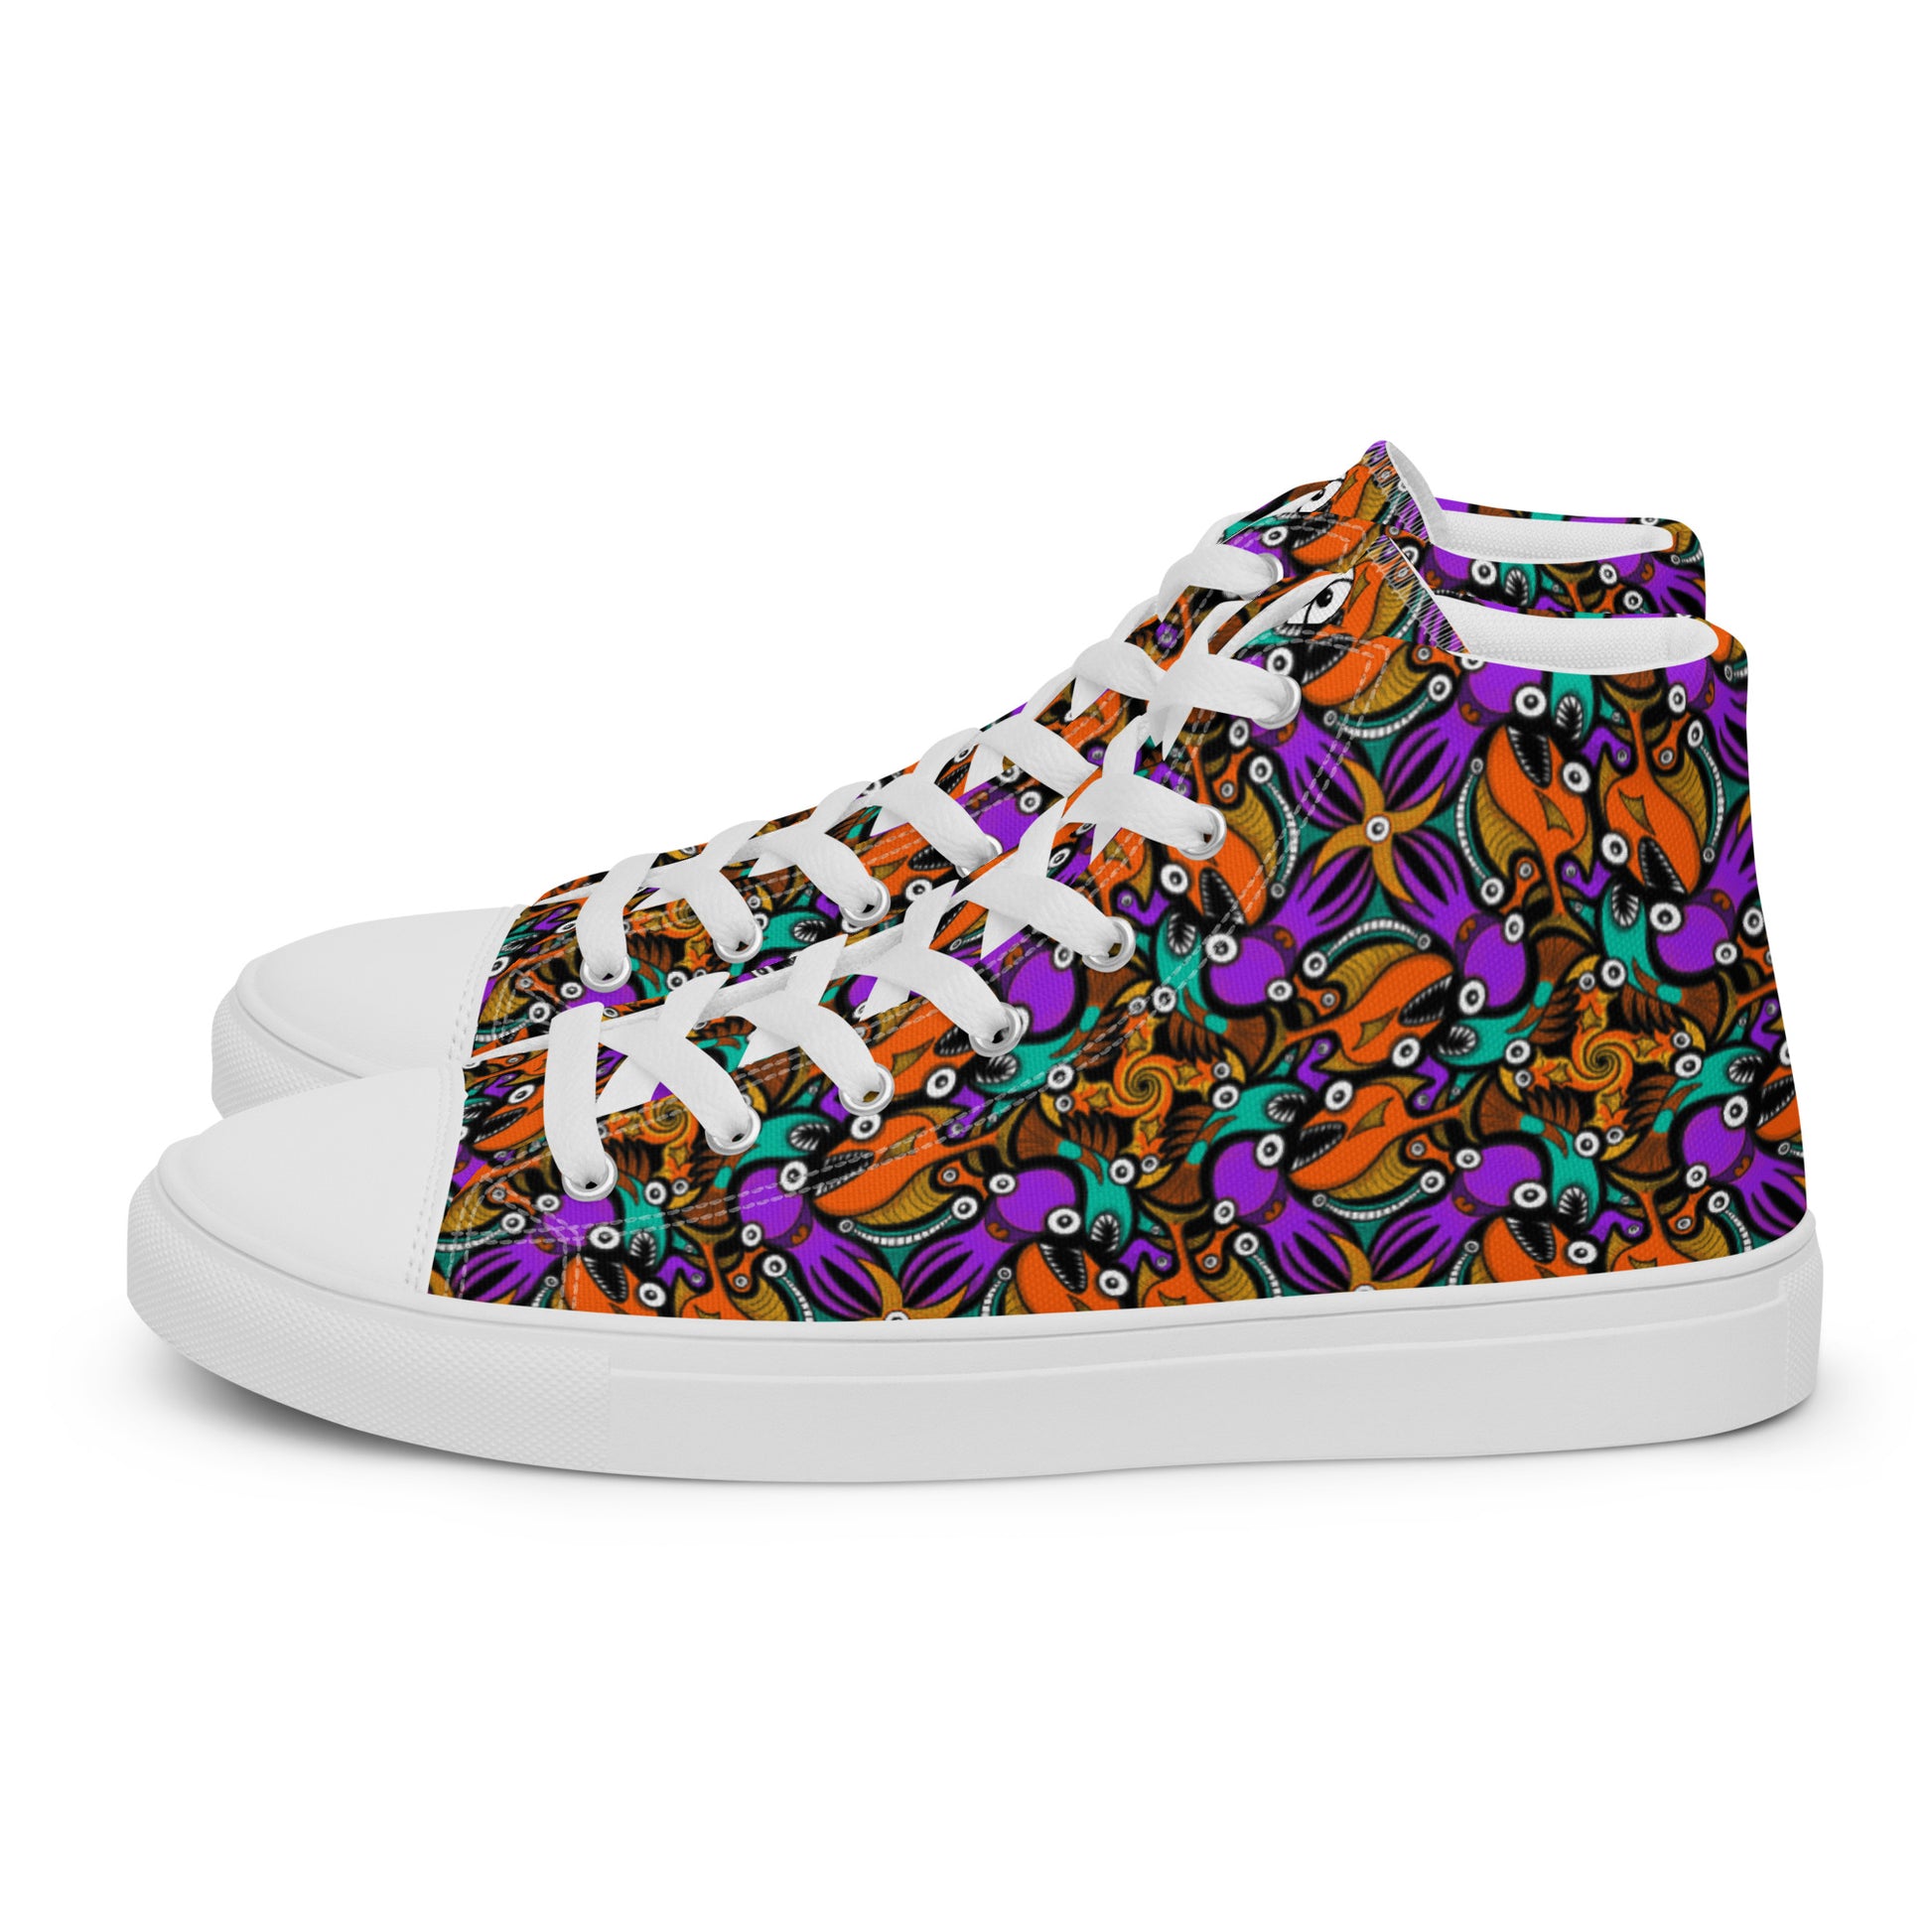 Mesmerizing creatures straight from the deep ocean Men’s high top canvas shoes. Side view